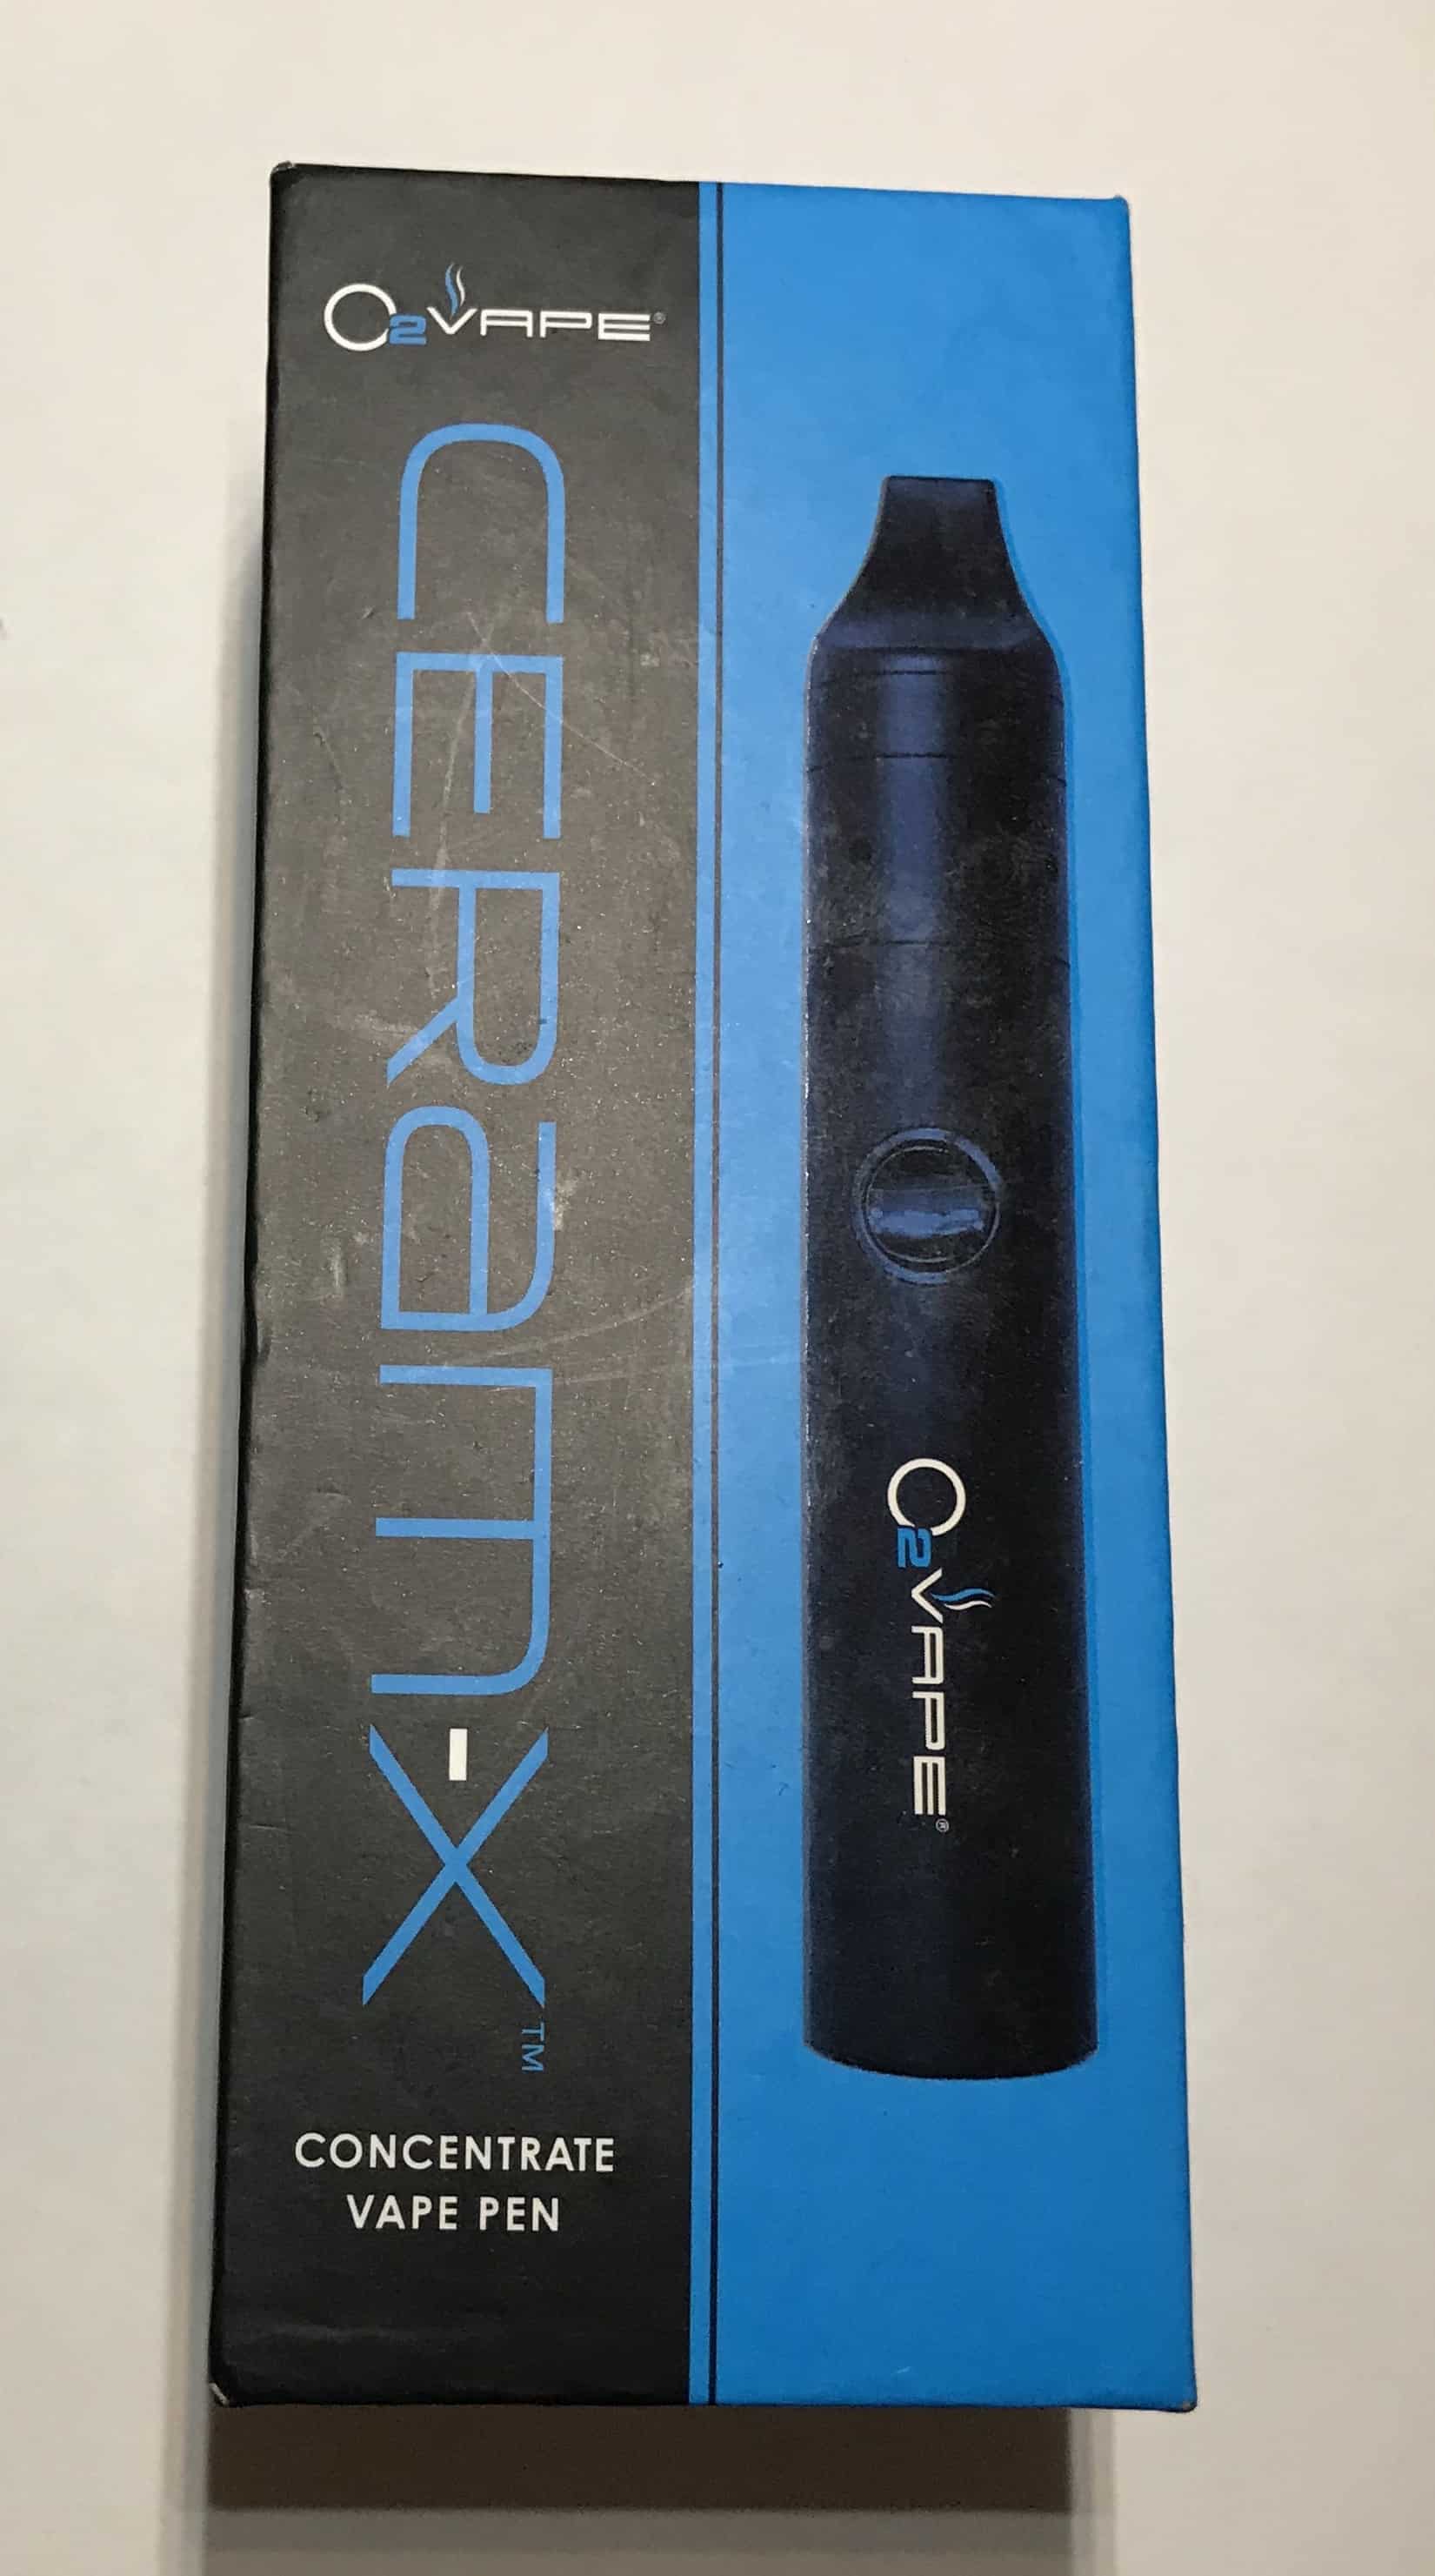 The Ceram-x vape pen is perfect if you're looking for flavorful and soothing hits